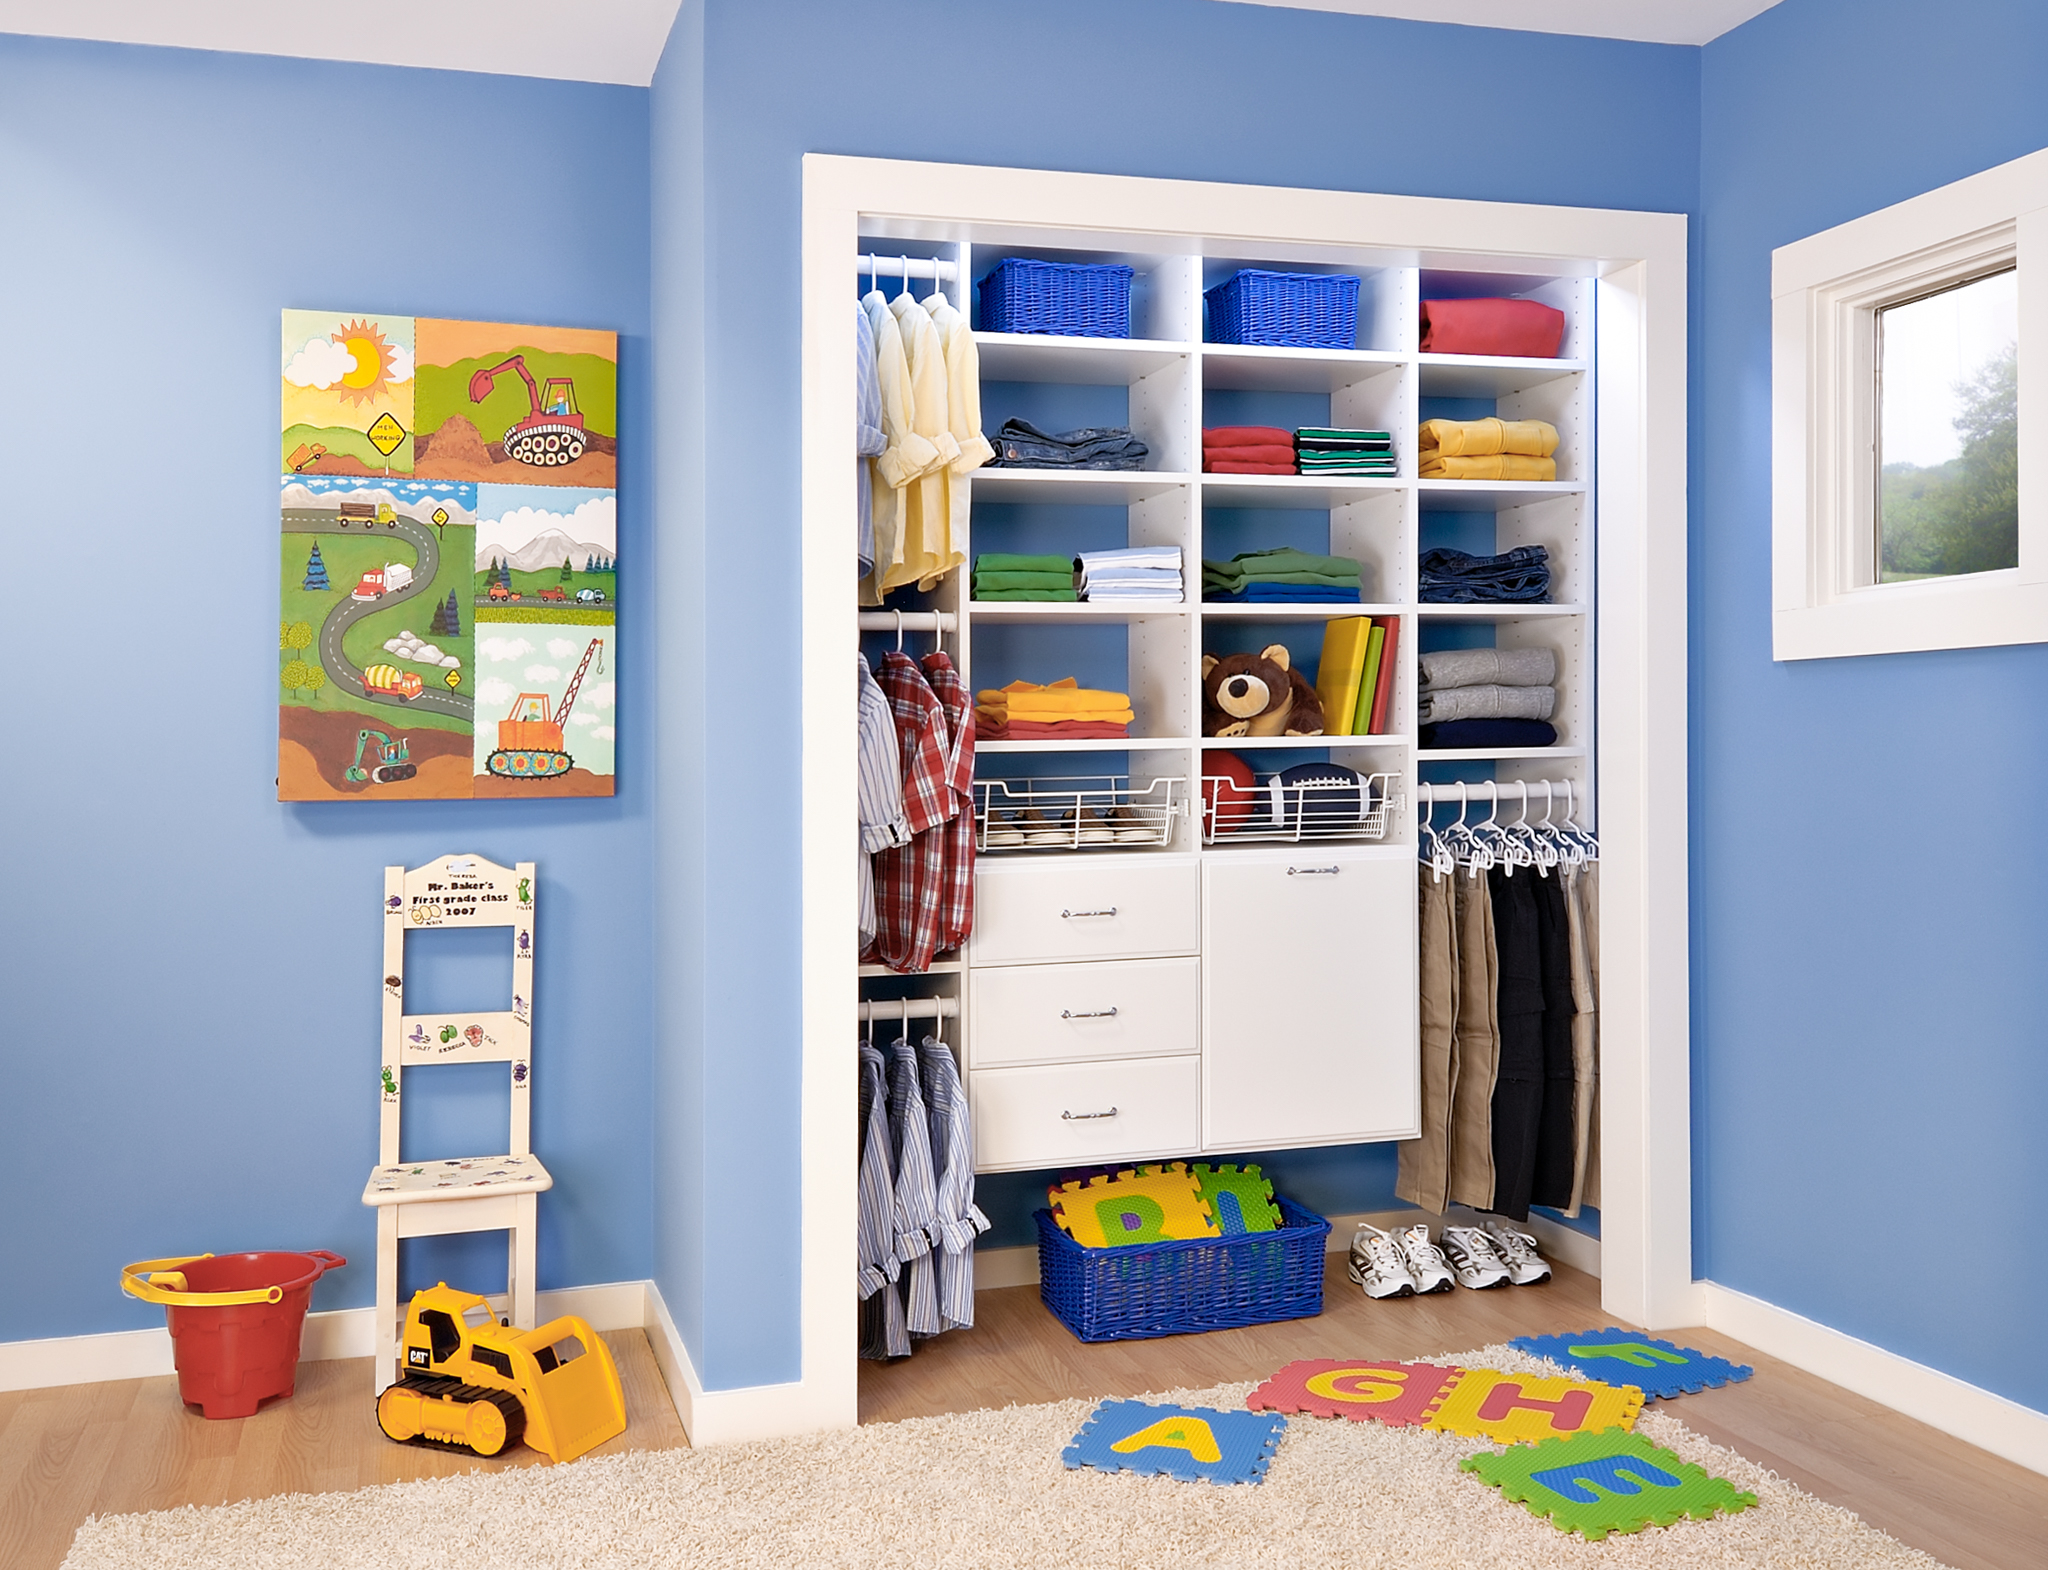 4 Ideas for Organizing Your Kid's Closet